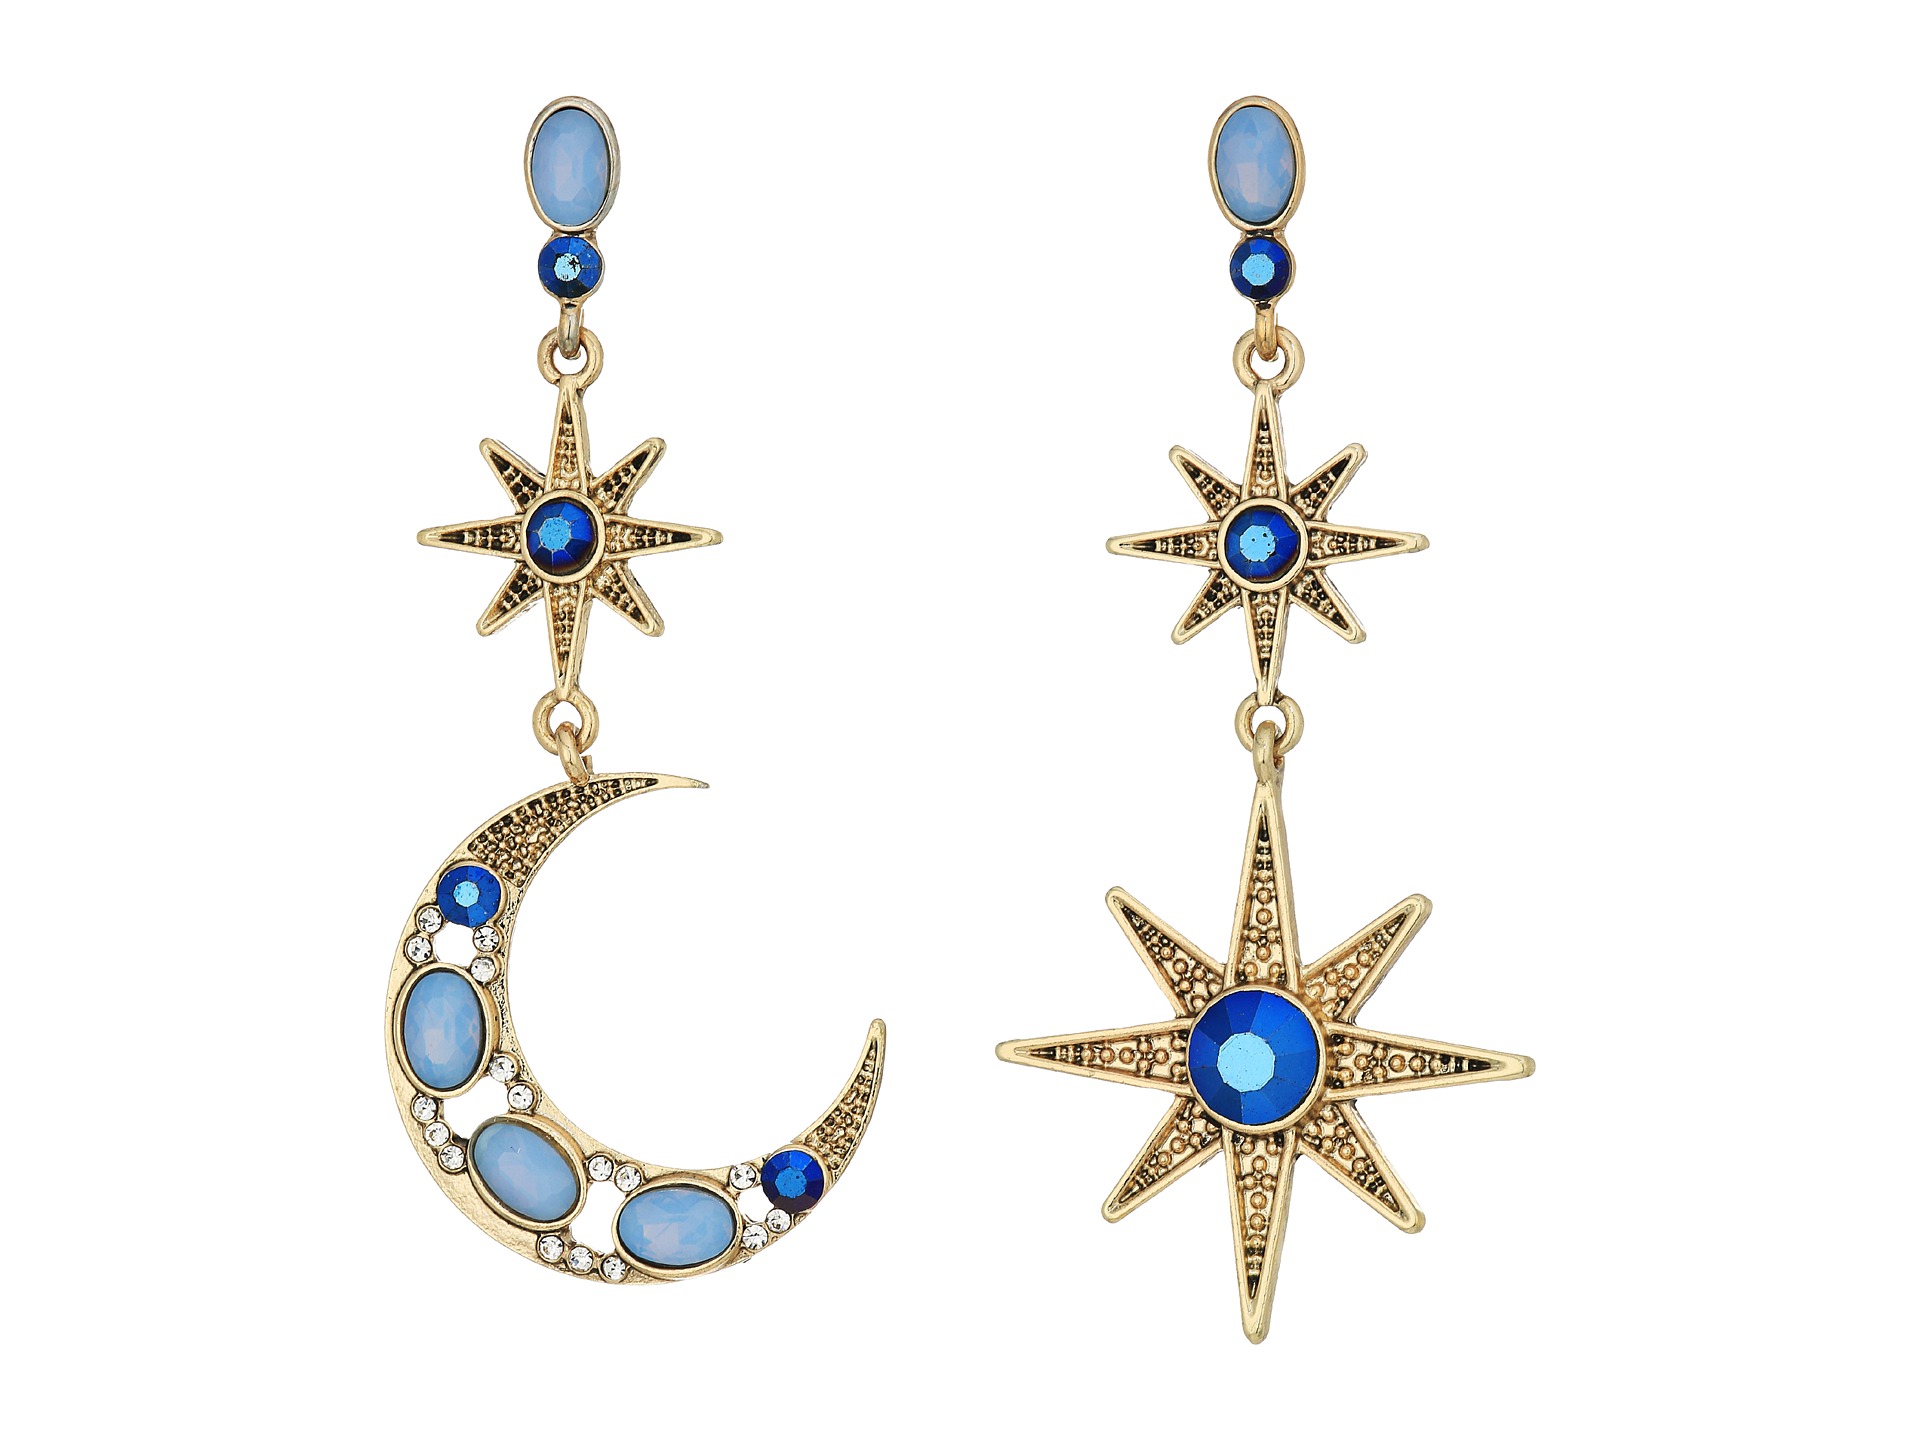 Betsey Johnson Moon and Star Drop Earrings at Zappos.com